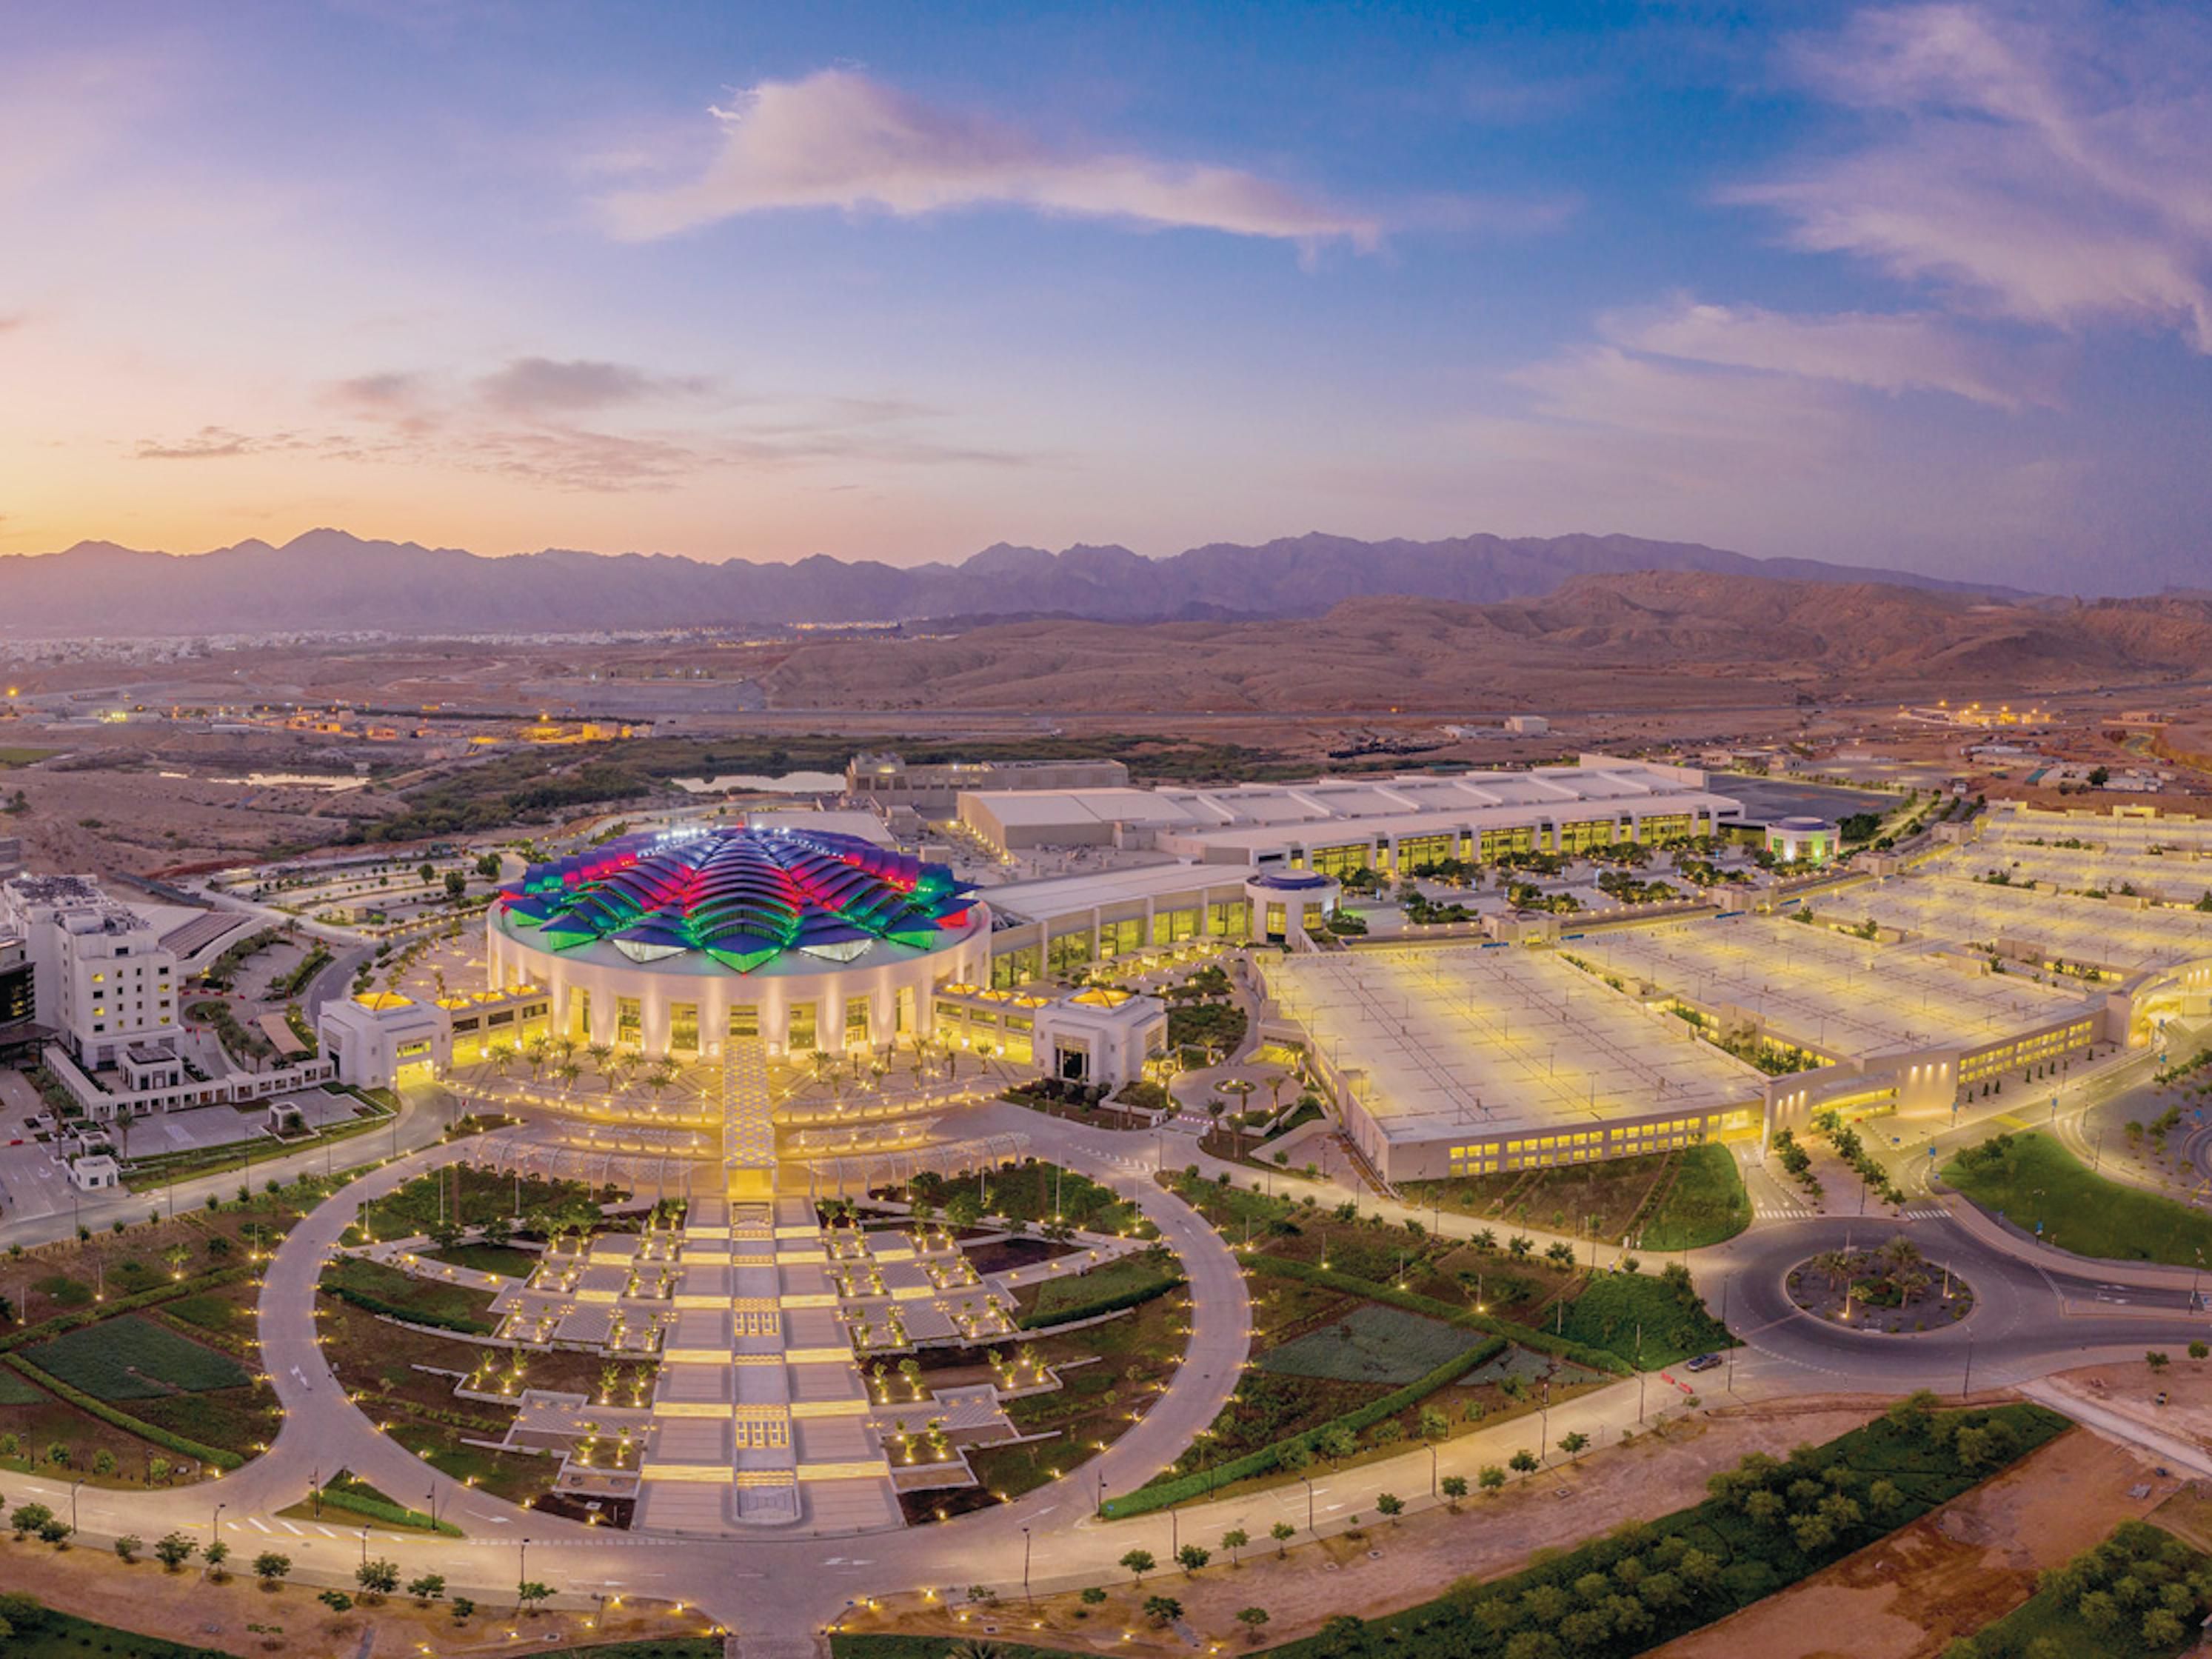 Oman Convention and Exhibition Centre is only 5 minutes away. Stay with us when attending an event at the OCEC and forget about the  traffic jam. Enjoy your morning coffee for a while longer instead.